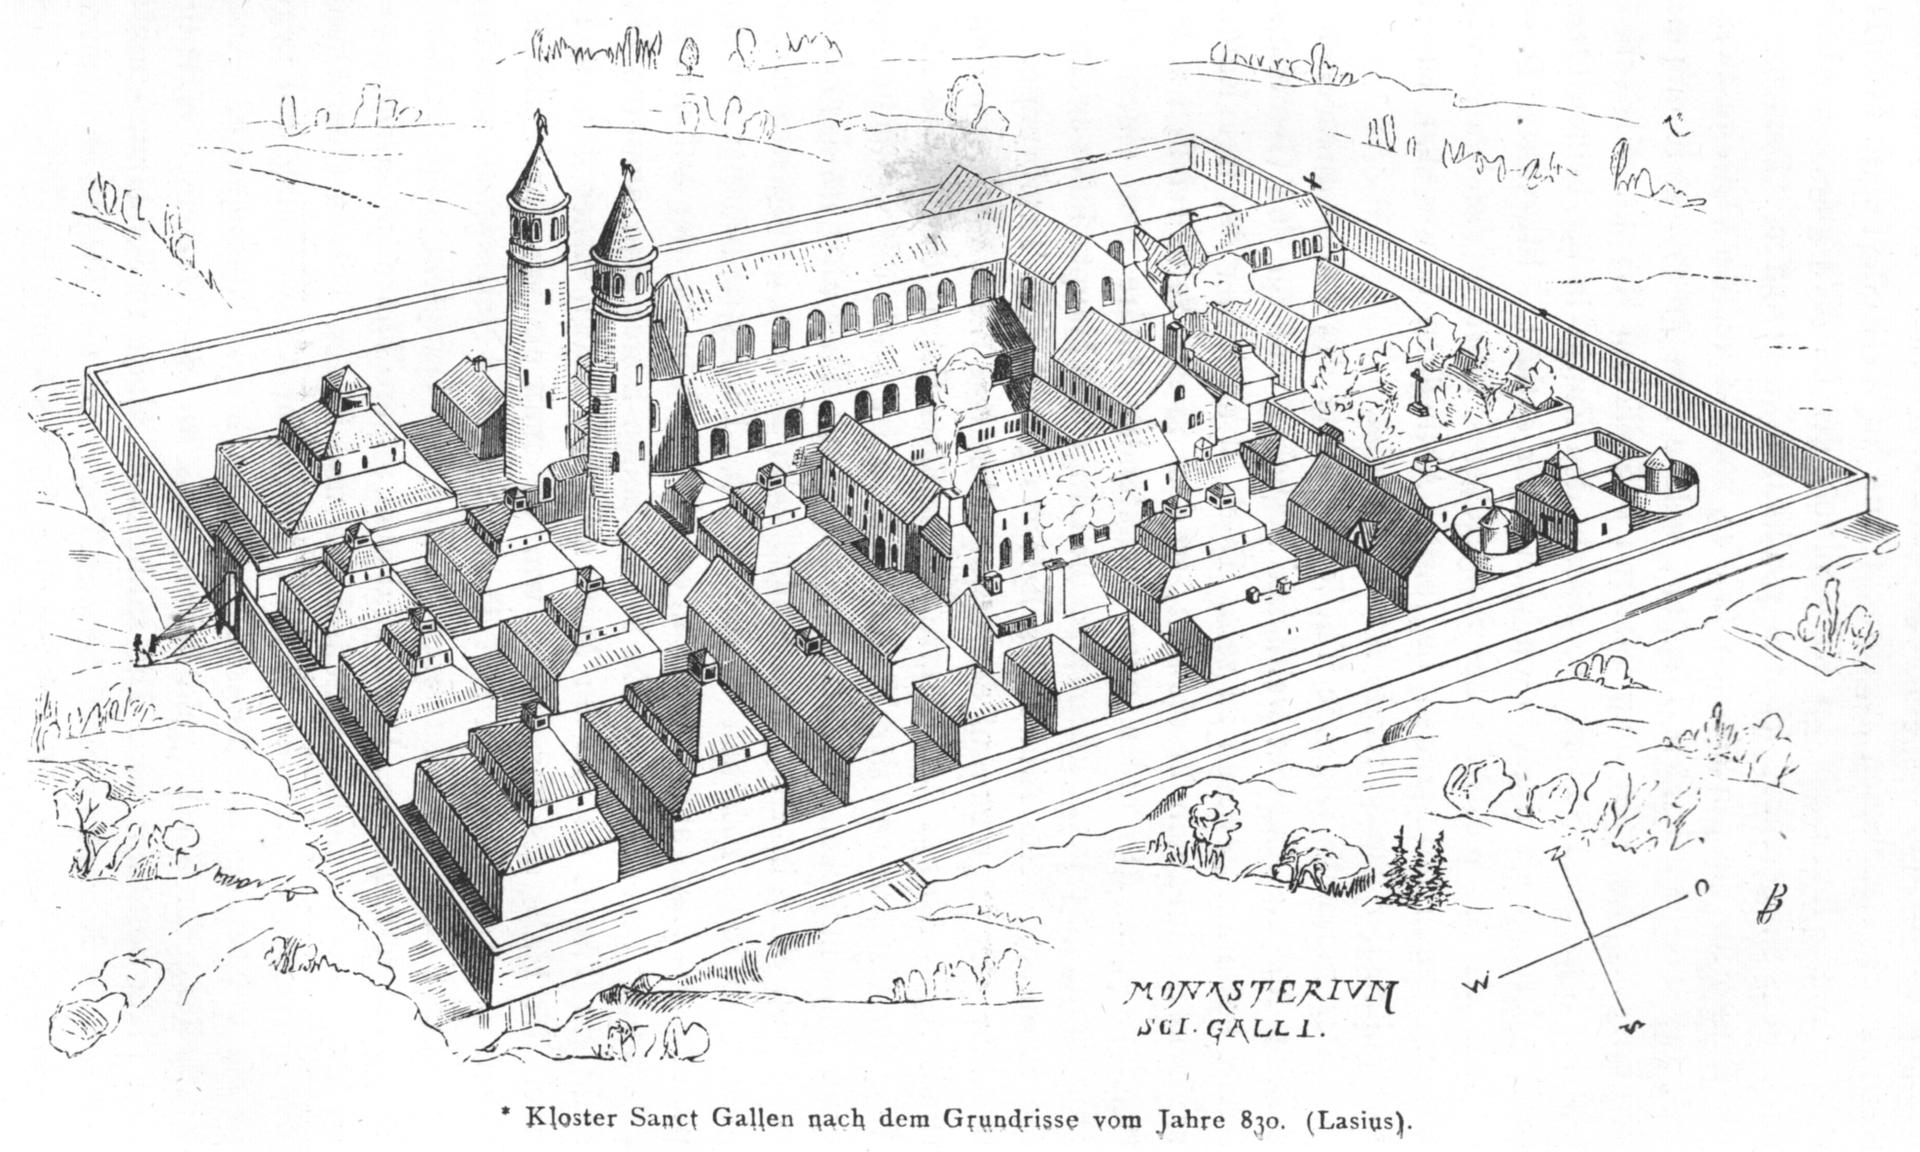 A sketch of a Benedictine cloister being replicated at Campus Galli.